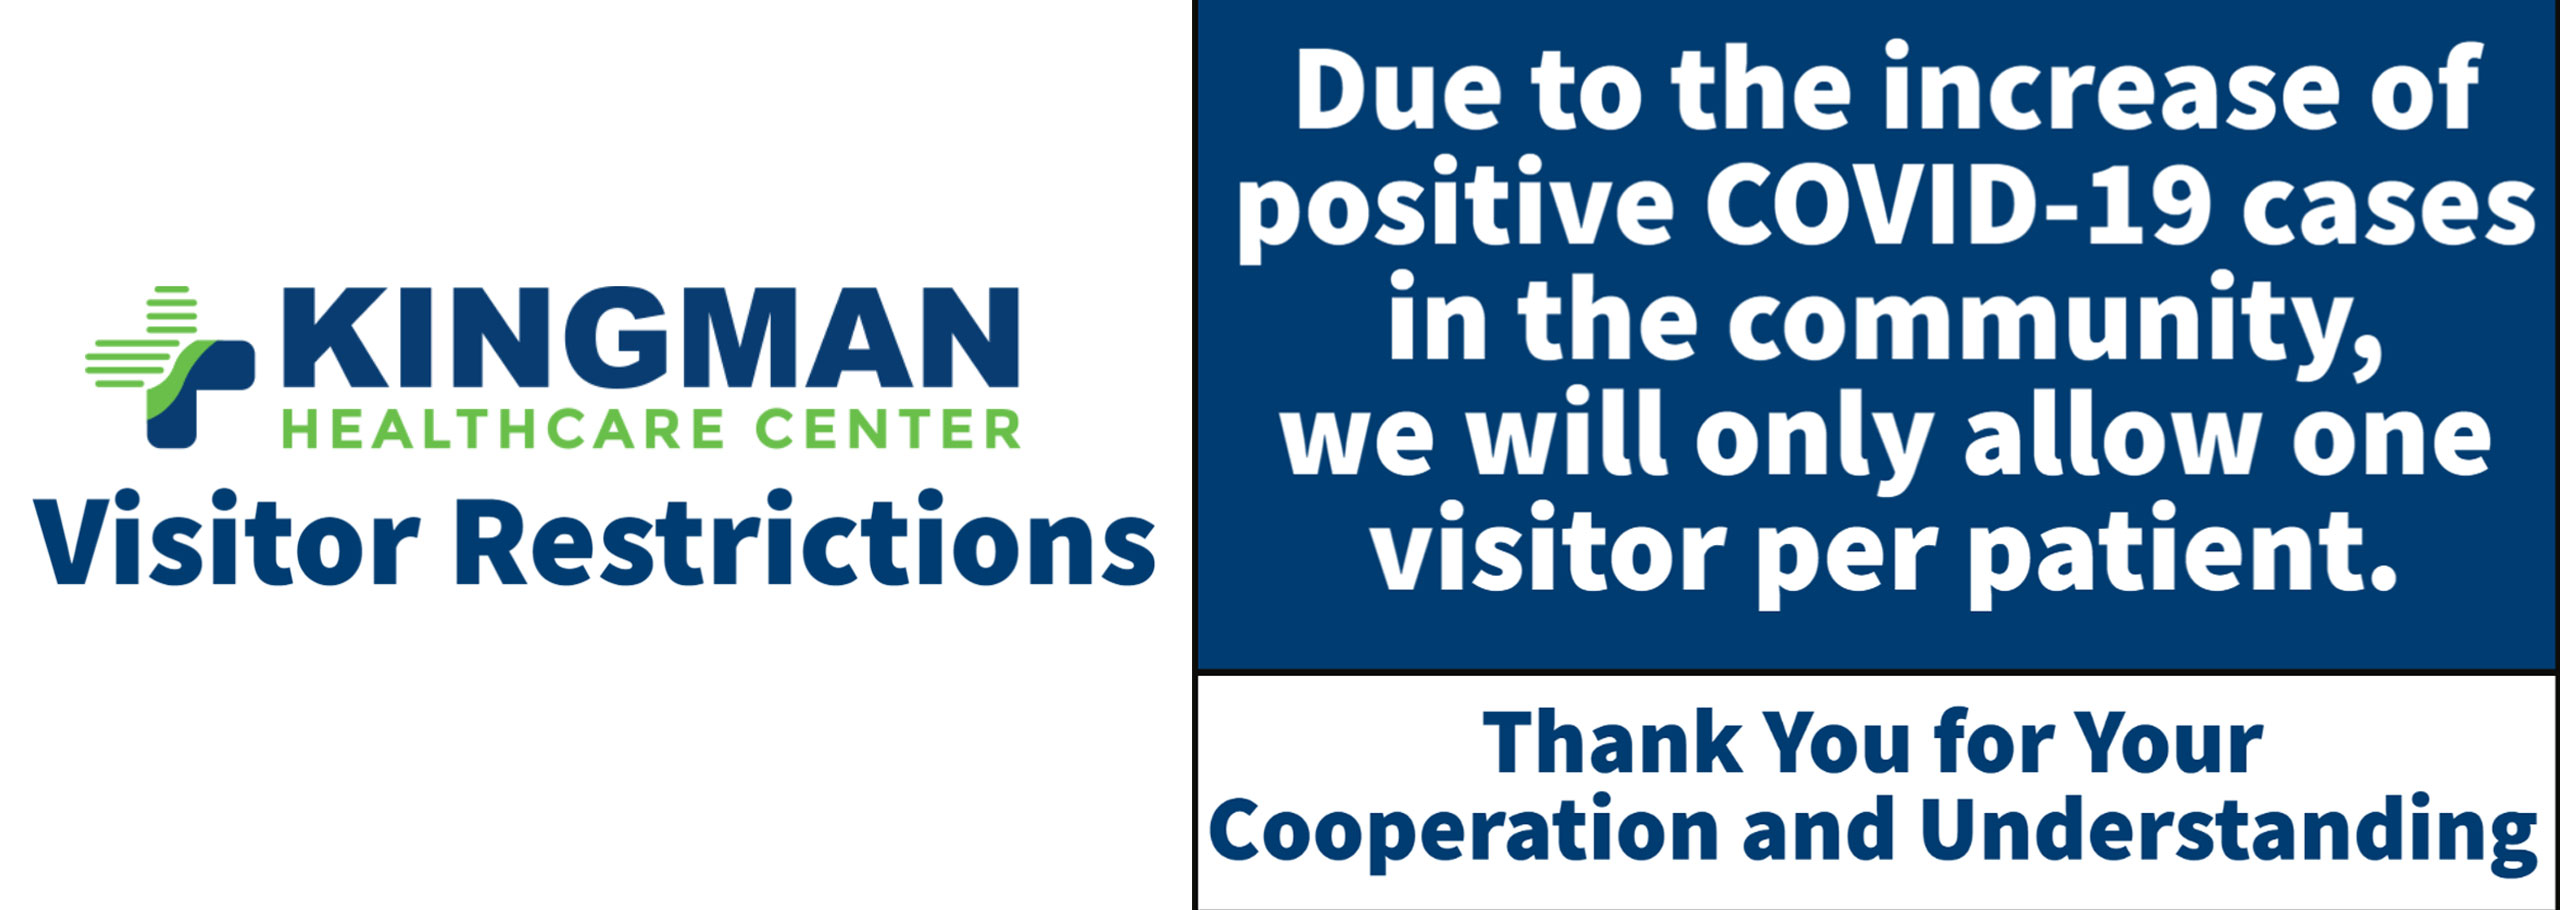 Banner that says:
Kingman HEALTHCARE CENTER Visitor Restrictions 
Due to the increase of positive COVID-19 cases in the community, we will only allow one visitor per patient.
Thank You for Your Cooperation and Understanding